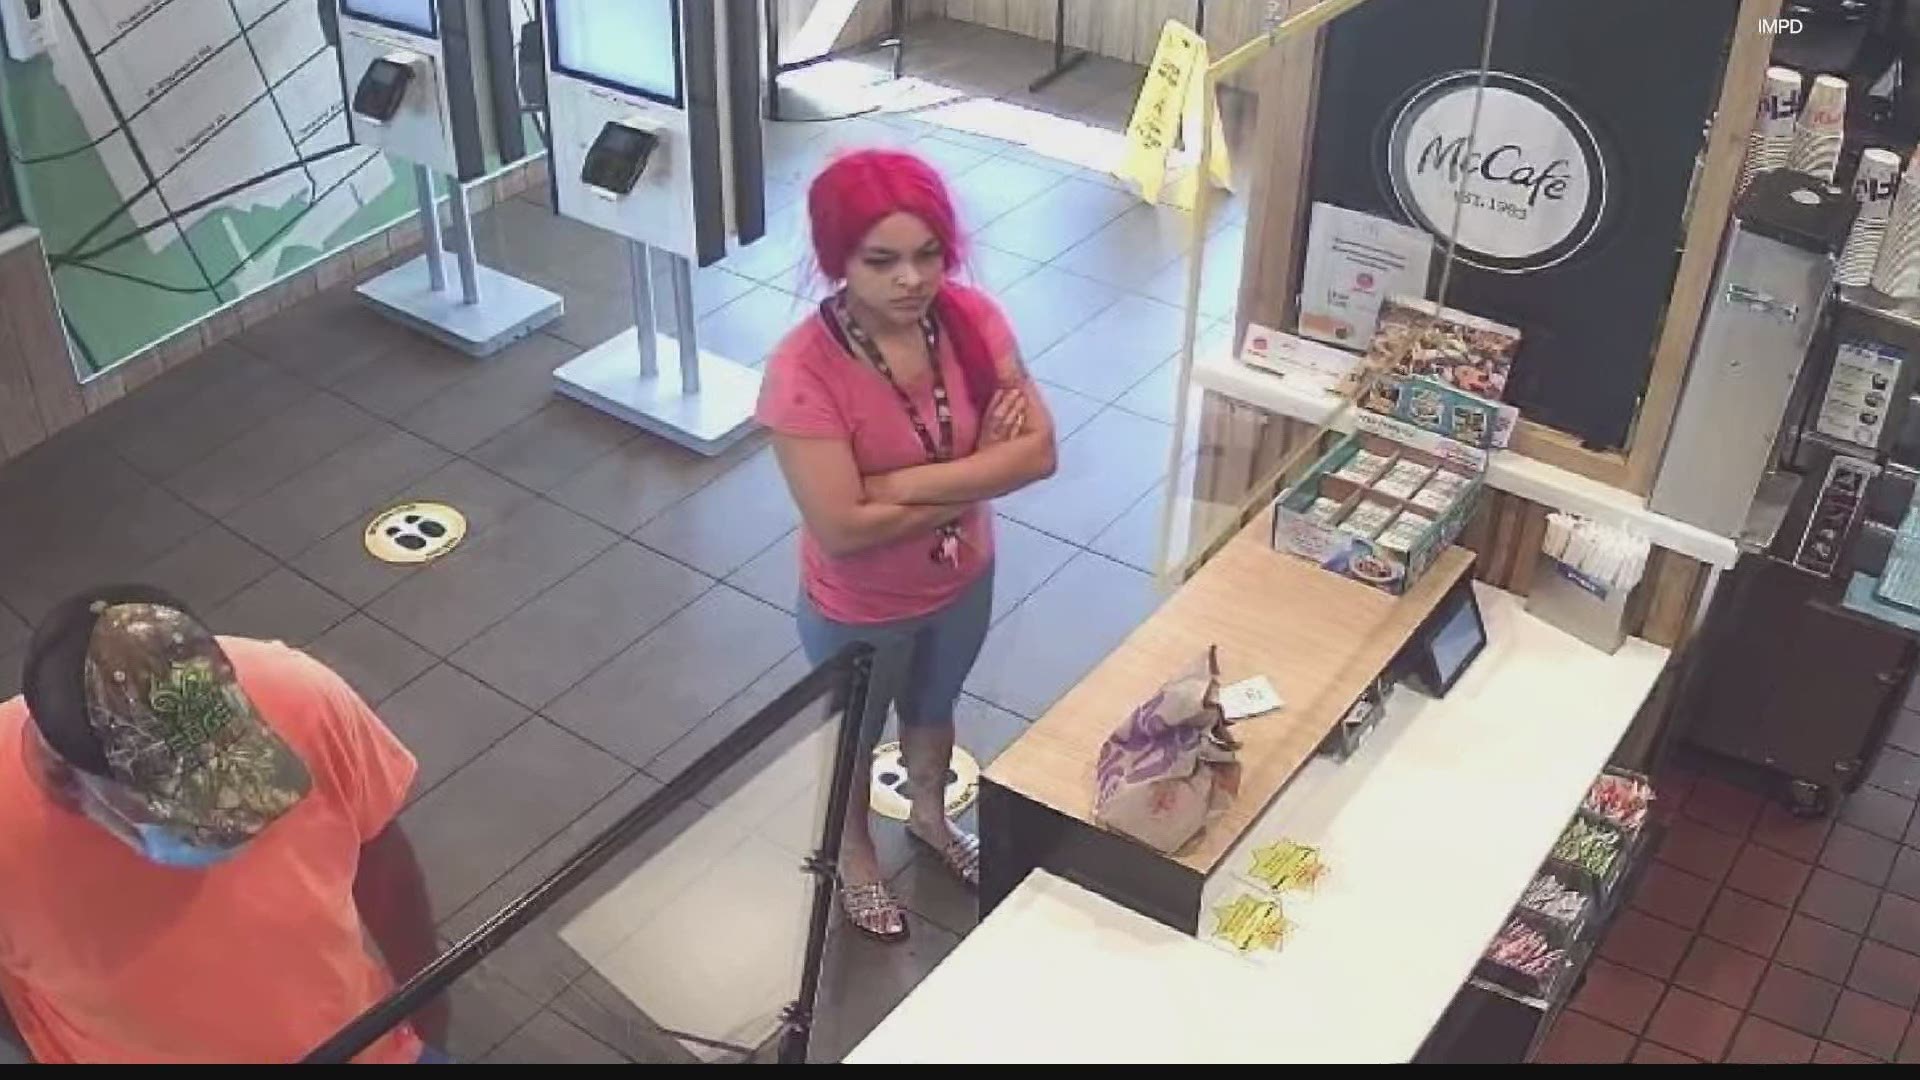 The recording shows a woman with red hair throwing several items over the counter.